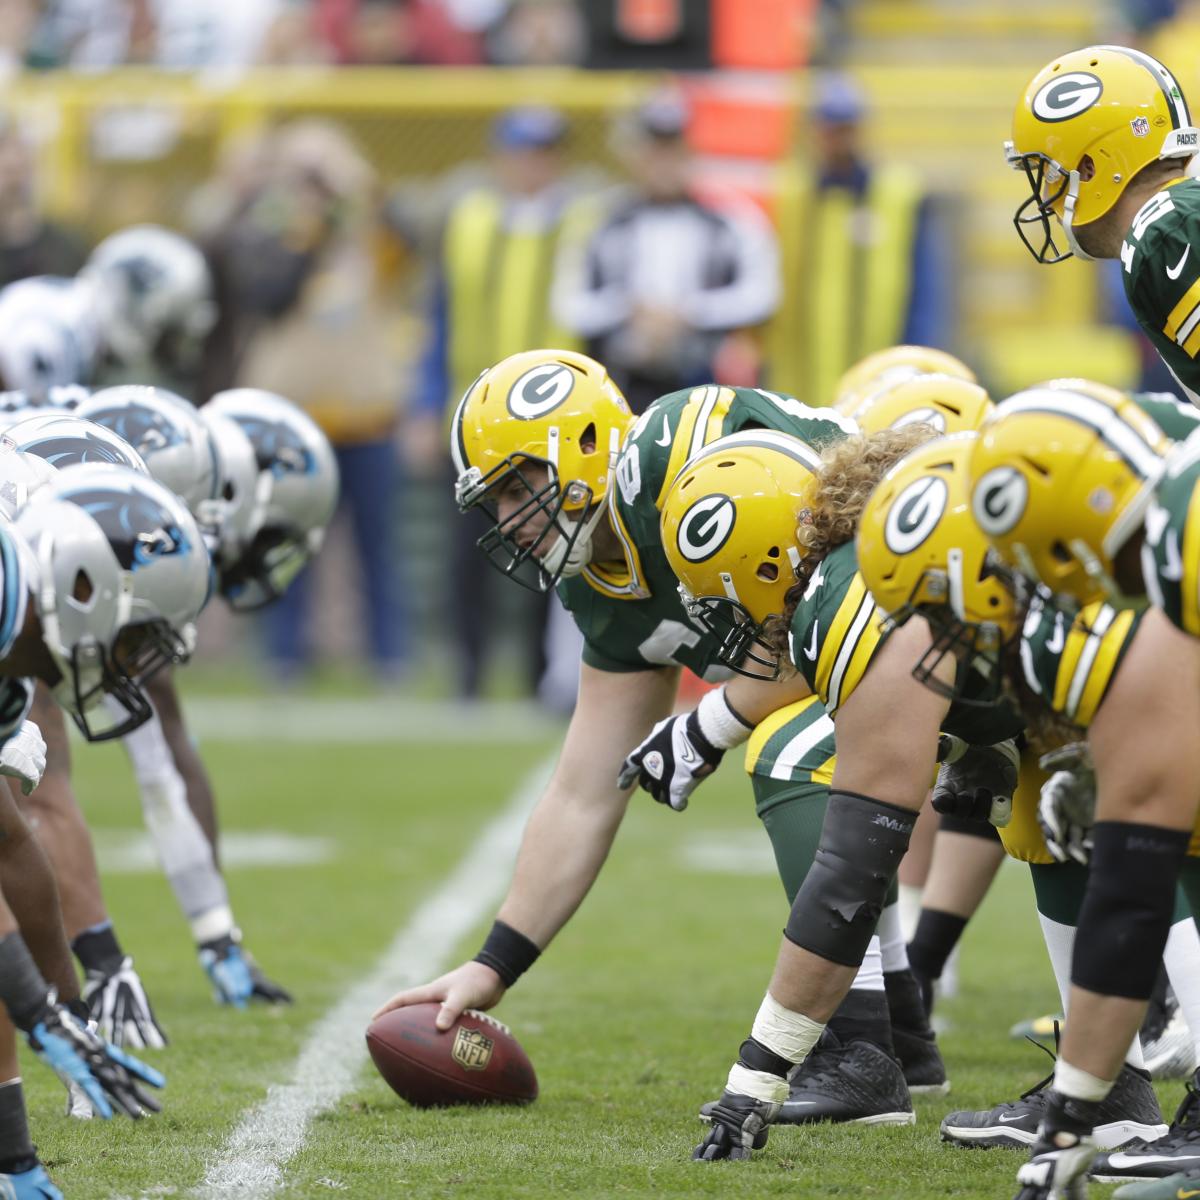 Green Bay Packers vs. Carolina Panthers What's the Game Plan for Green